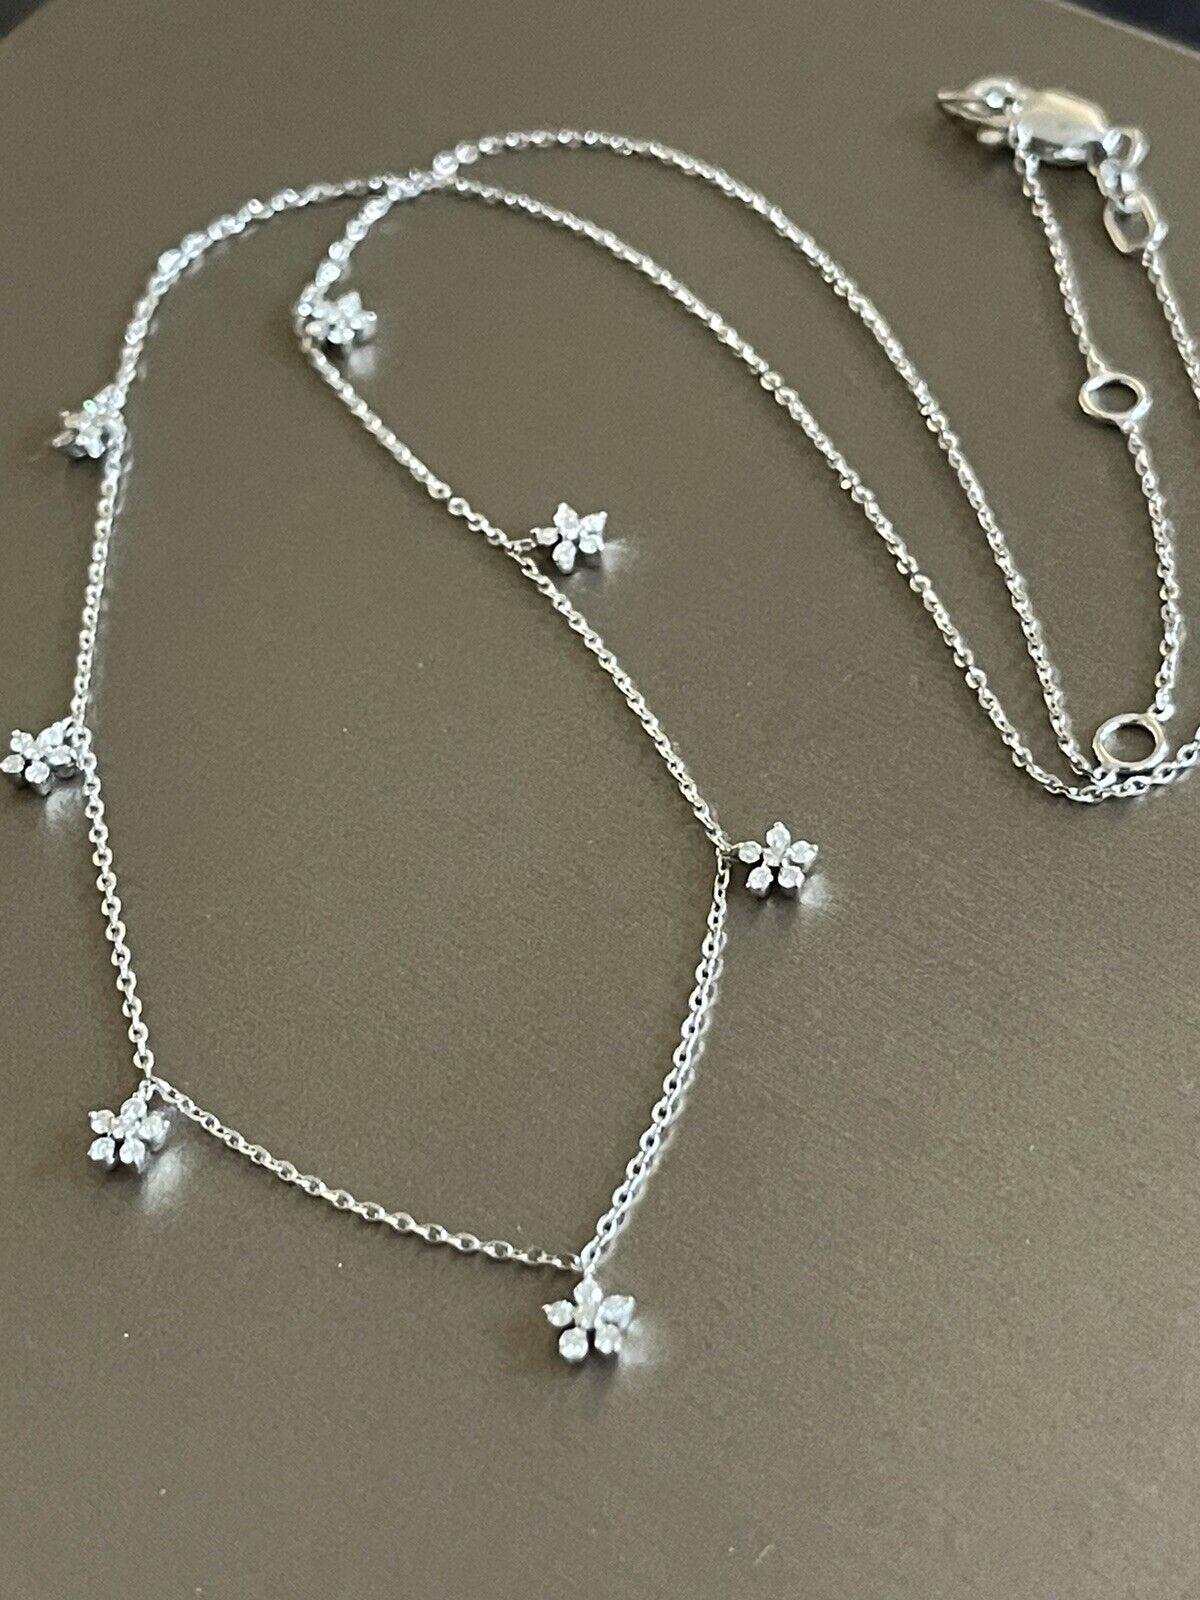 

Modern chic

Minimalist delicate fine jewellery straight from the heart of London Hatton Garden

We call it our Bridgeton Necklace as worn by main character

0.40ct diamonds set in flower cluster drops across the necklace

18 inch chain which can